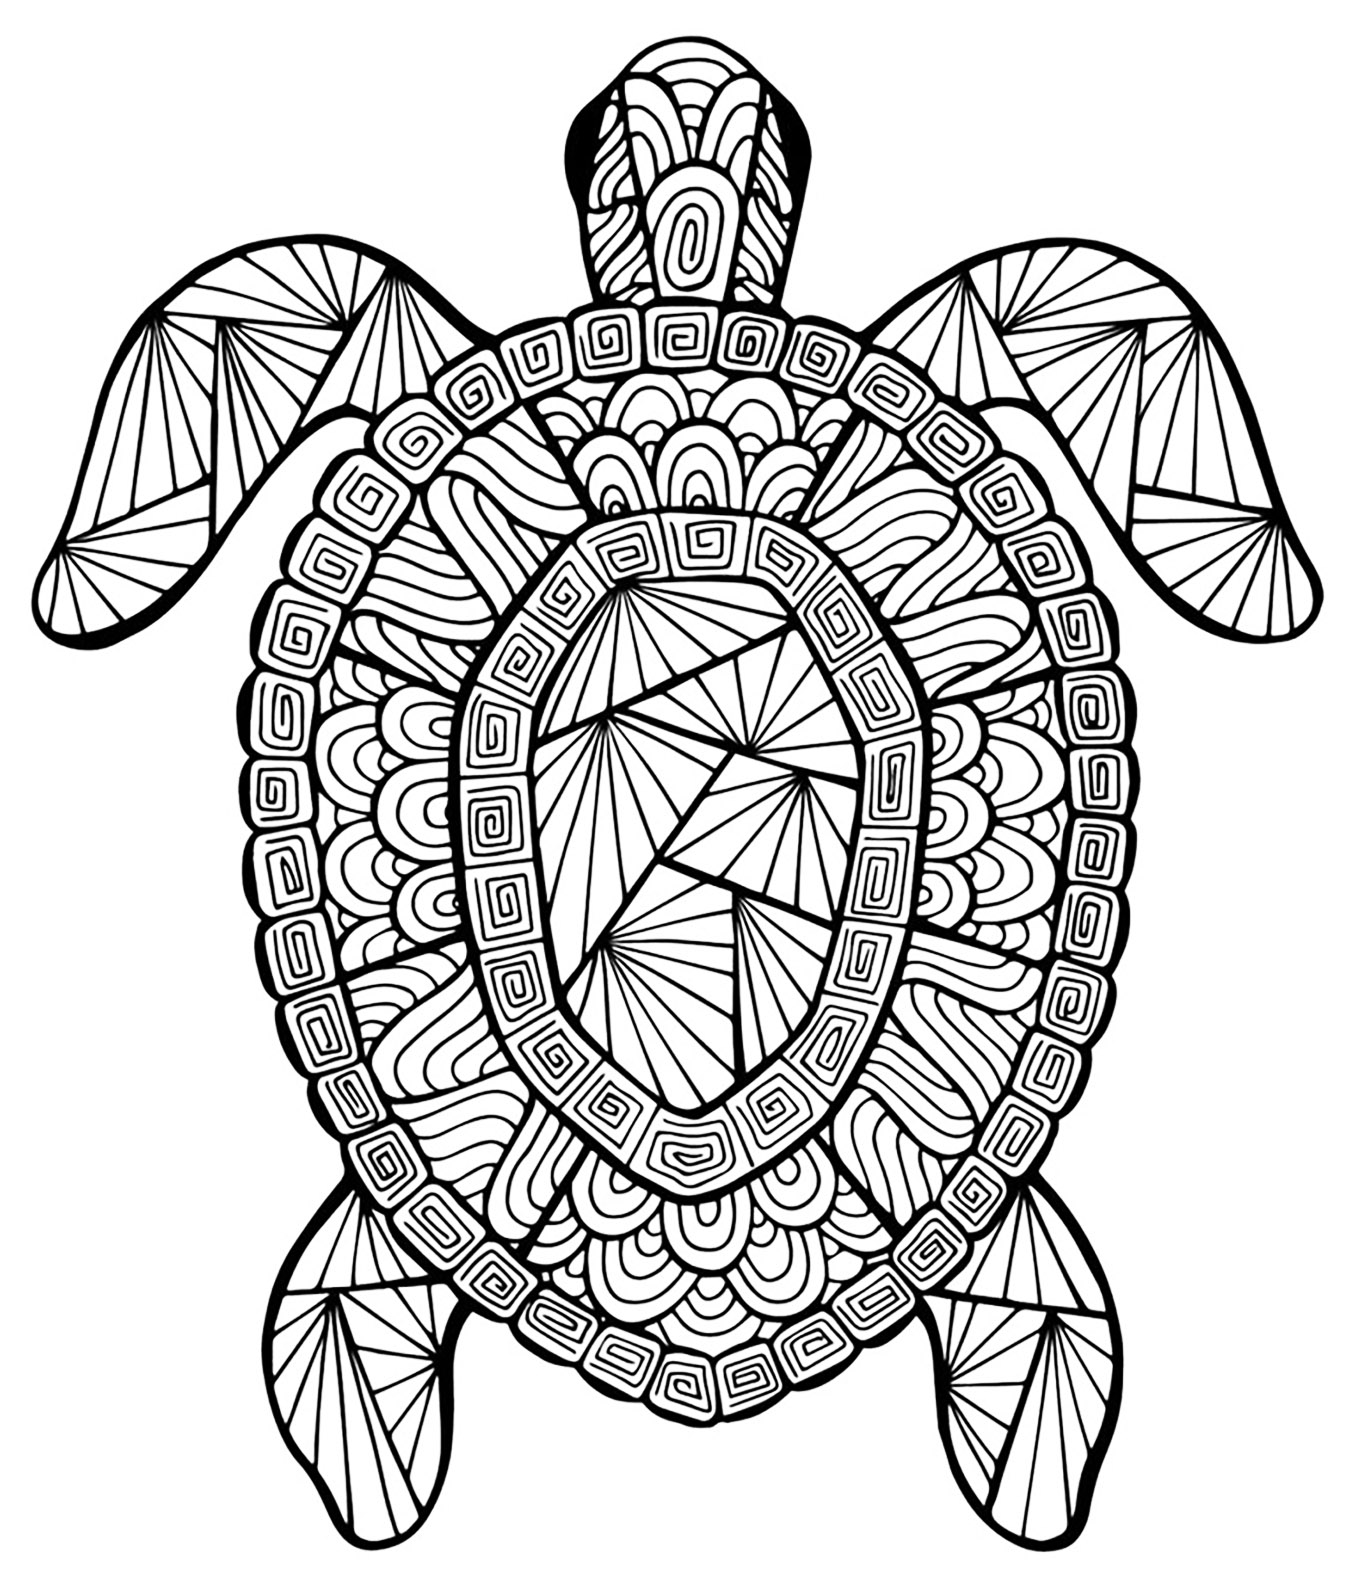 Sea Turtle Coloring Pages For Adults at GetColorings.com ...